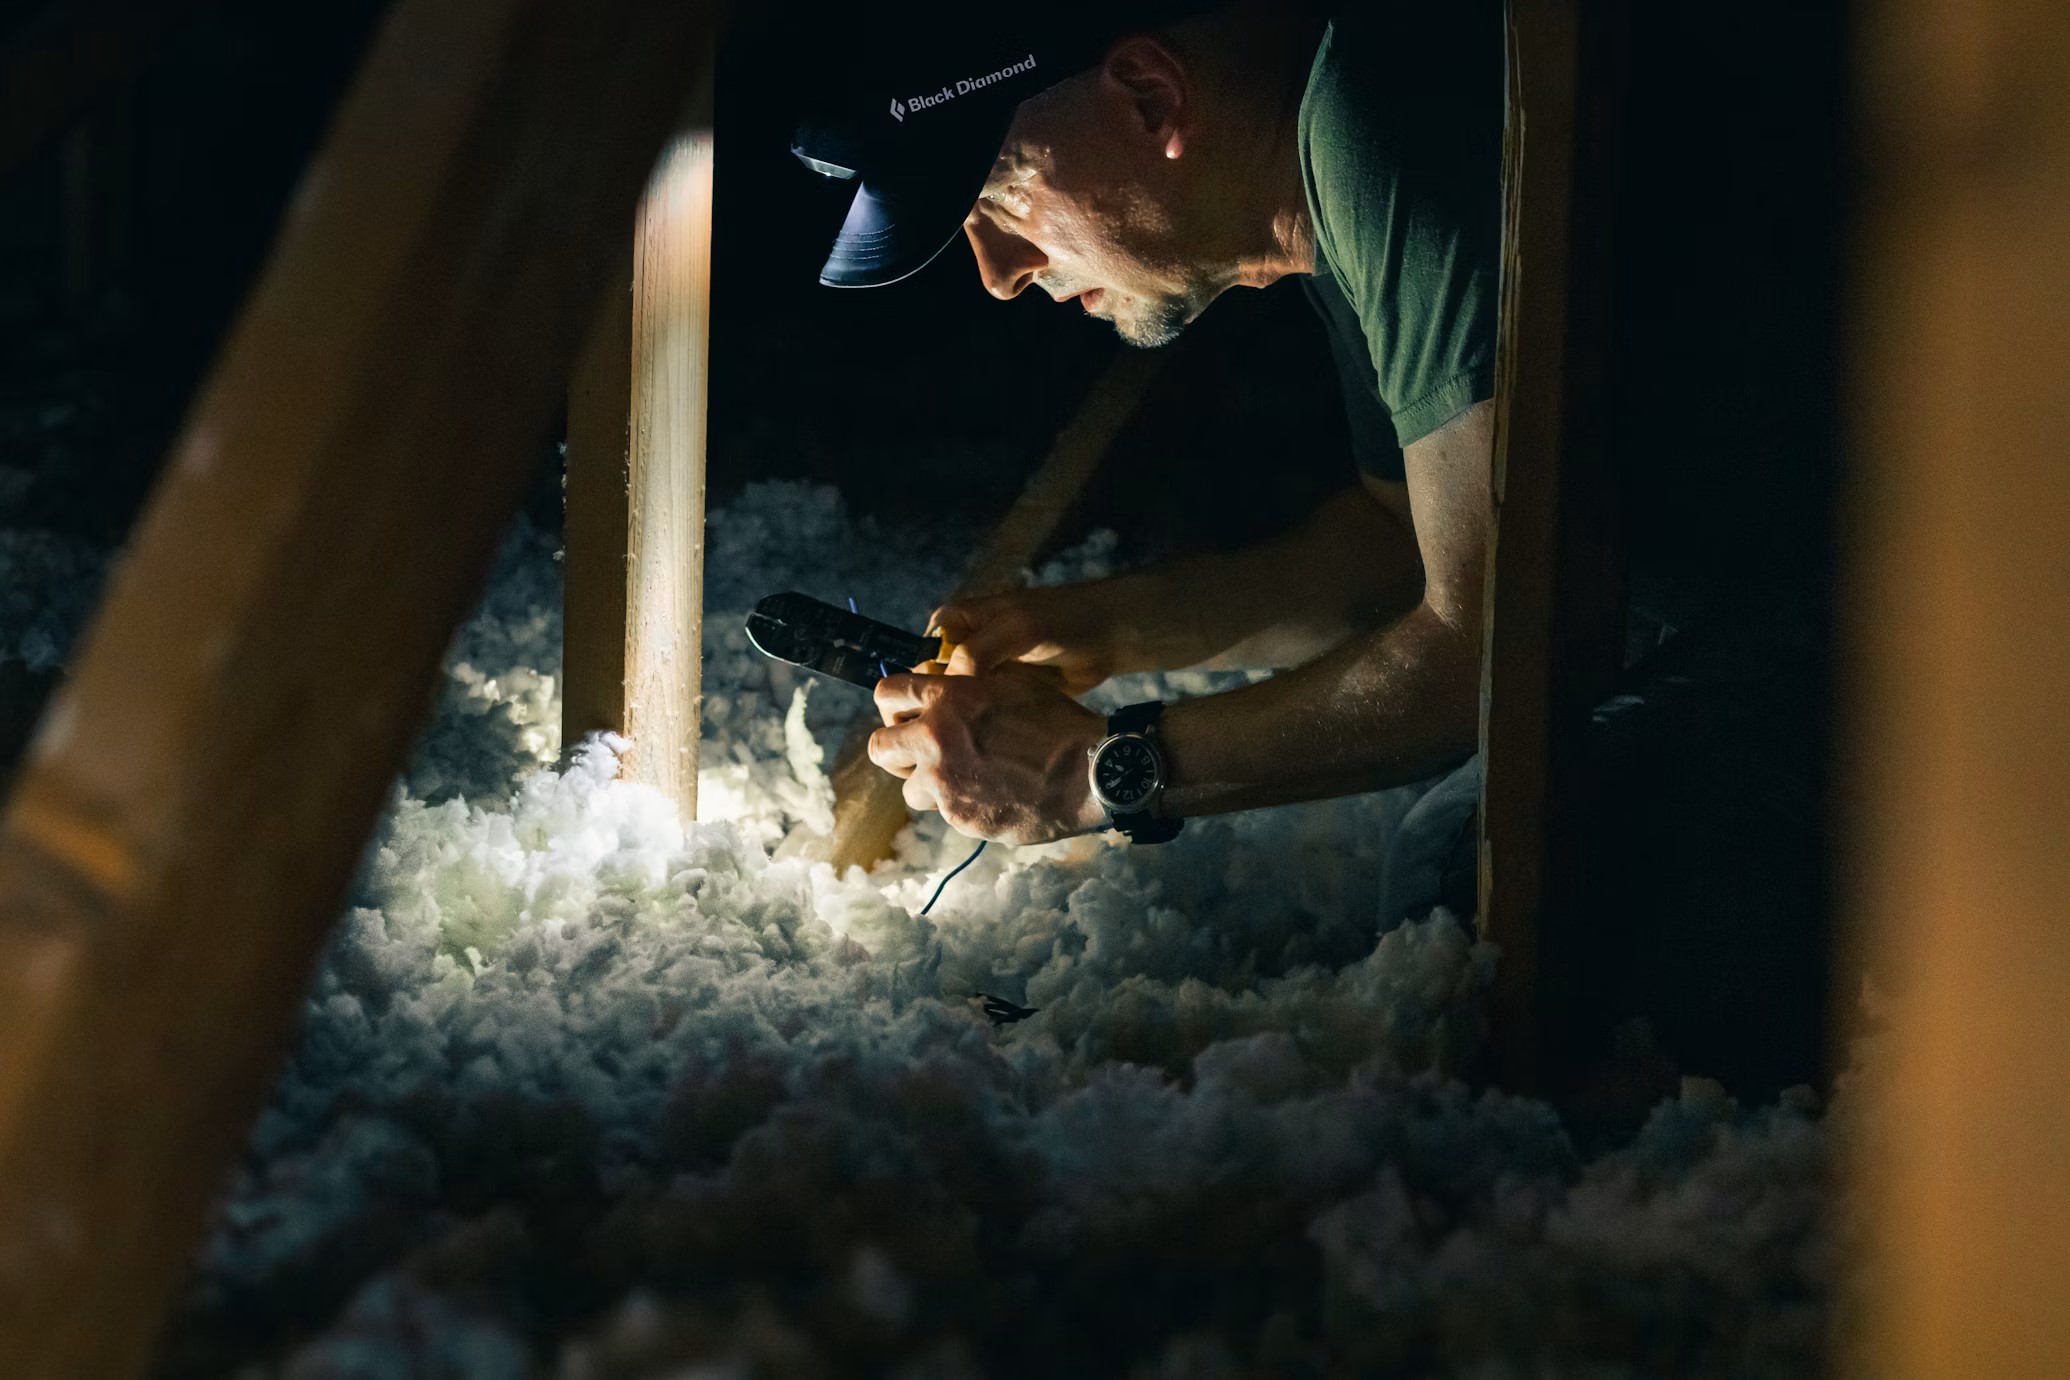 A person is in an attic space, installing sustainable insulation. The insulation is made of natural fibers or recycled materials.